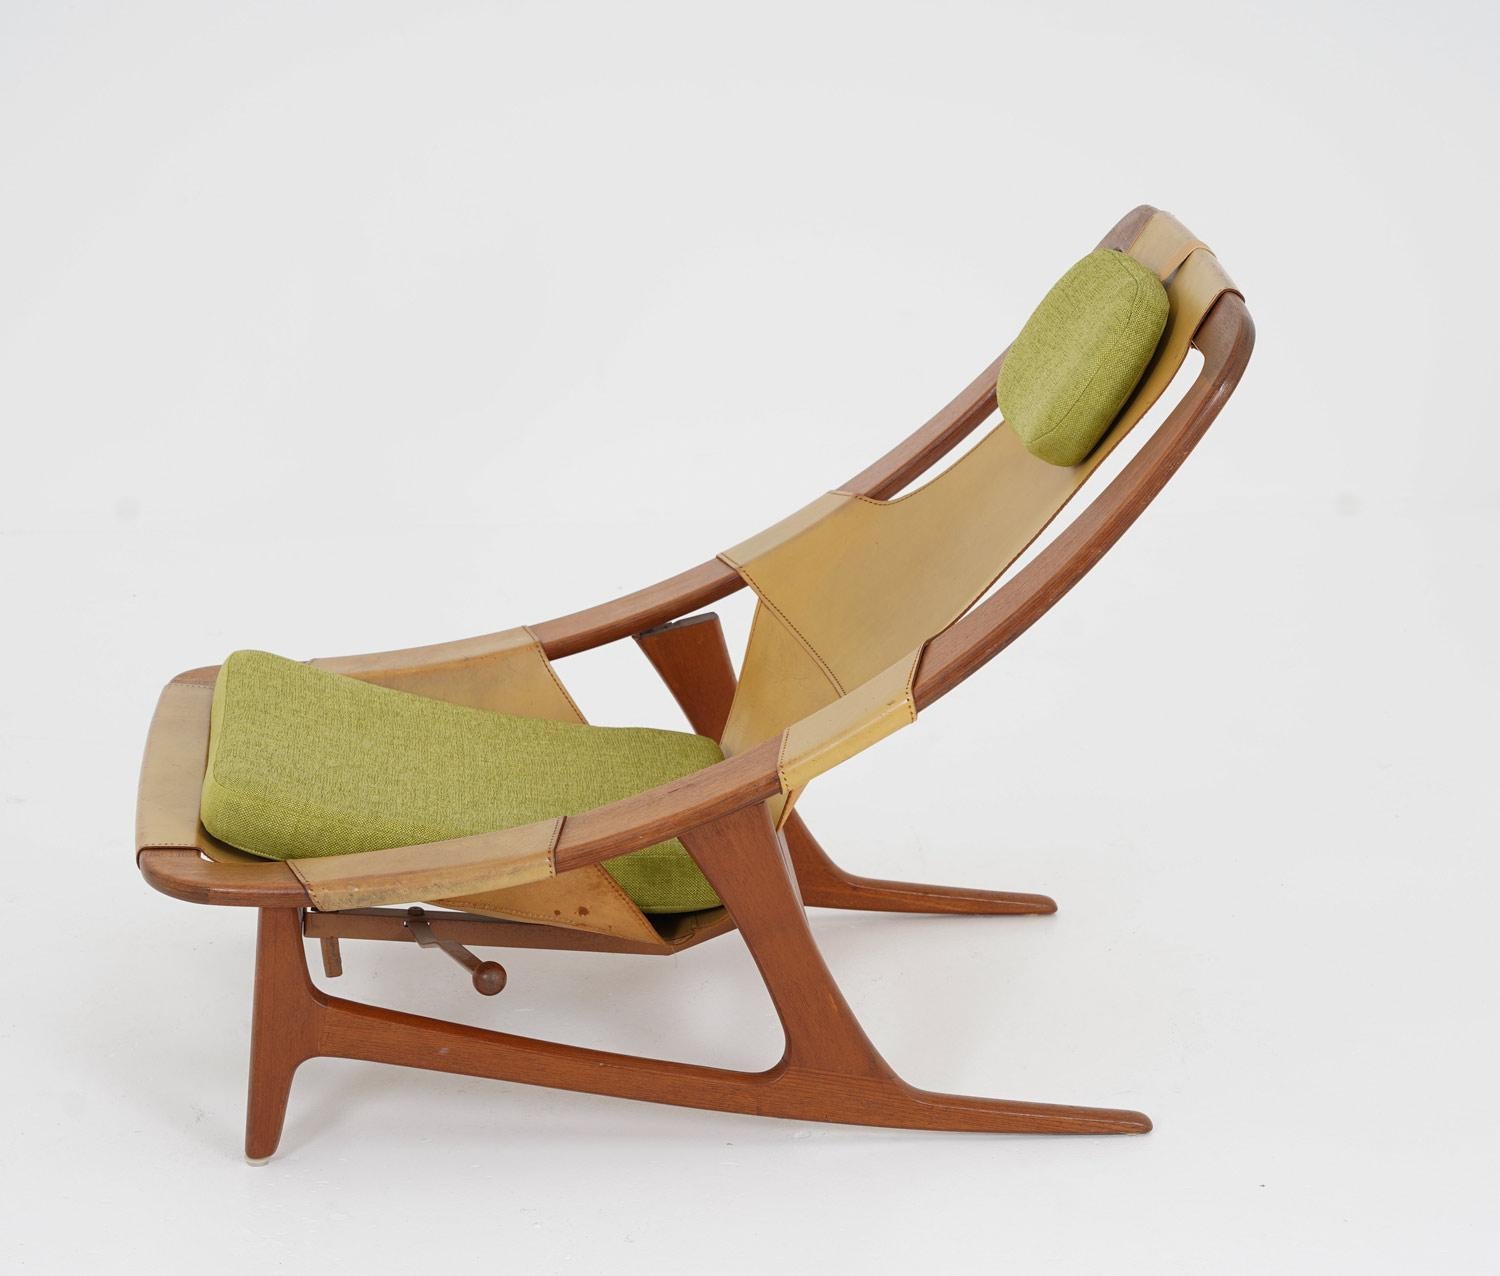 The Holmenkollen lounge chair, designed by Arne Tidemand Ruud and produced by AS Inventar, is a beautiful example of mid-century Scandinavian design. It features a teak frame, with thick leather used for the seating and wool upholstery on the